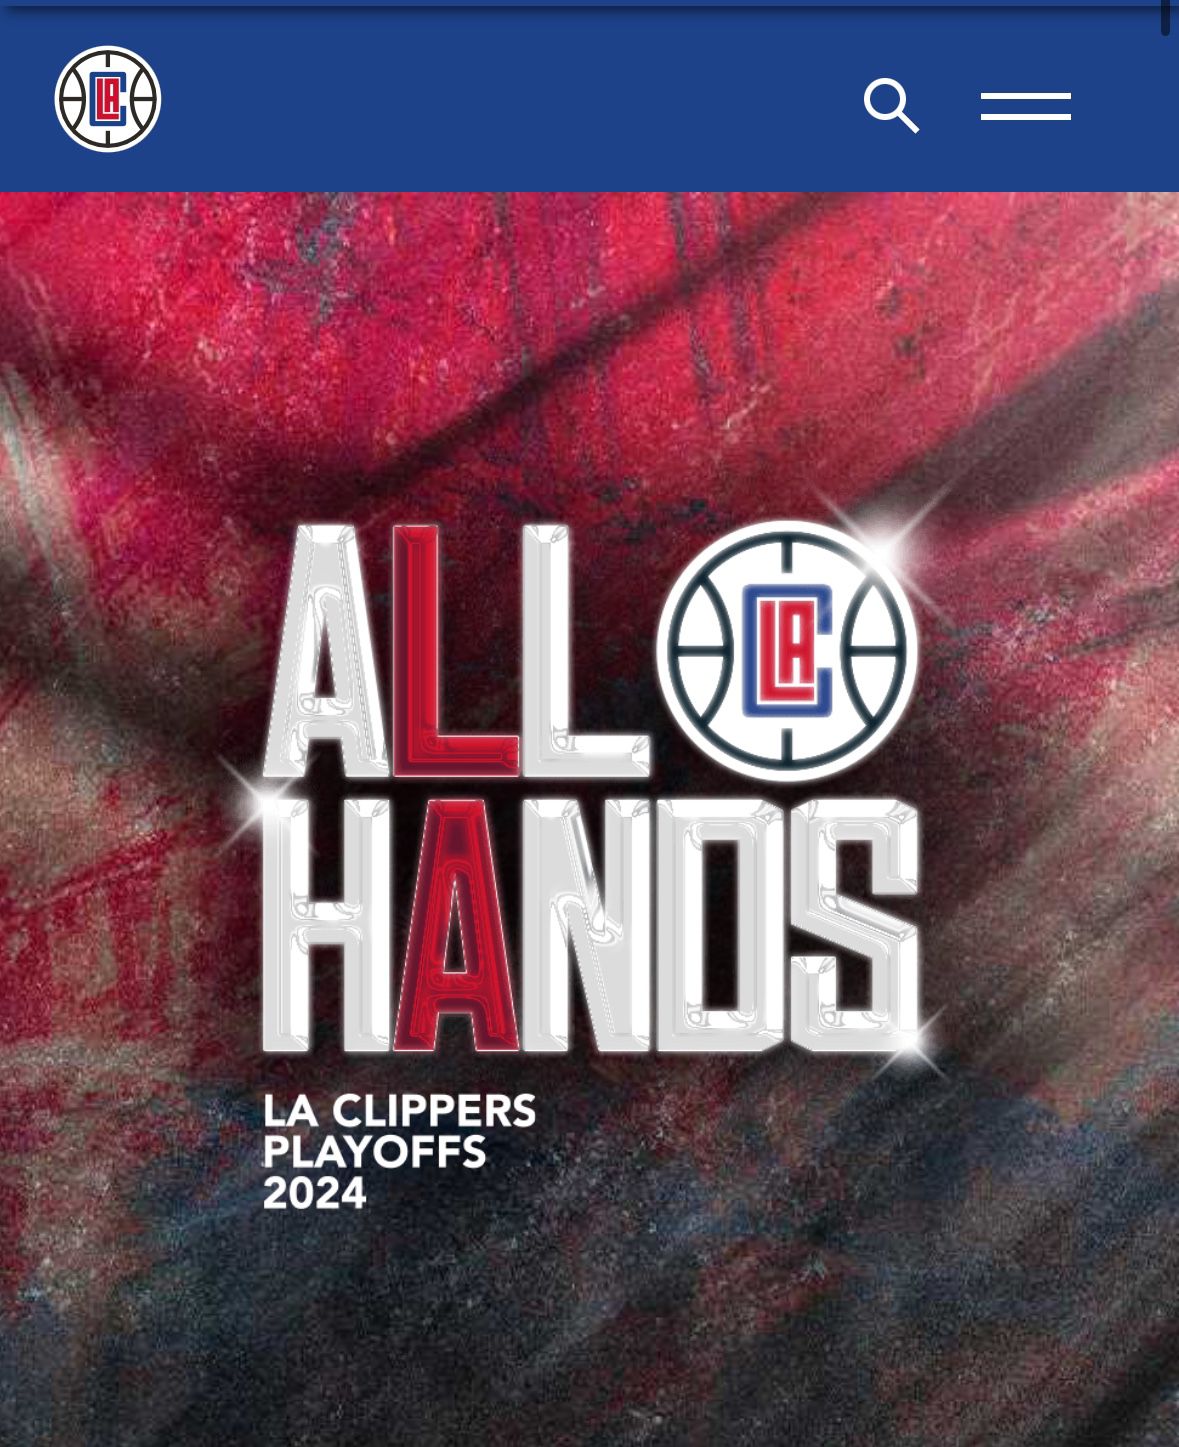 Clippers Playoff Tickets